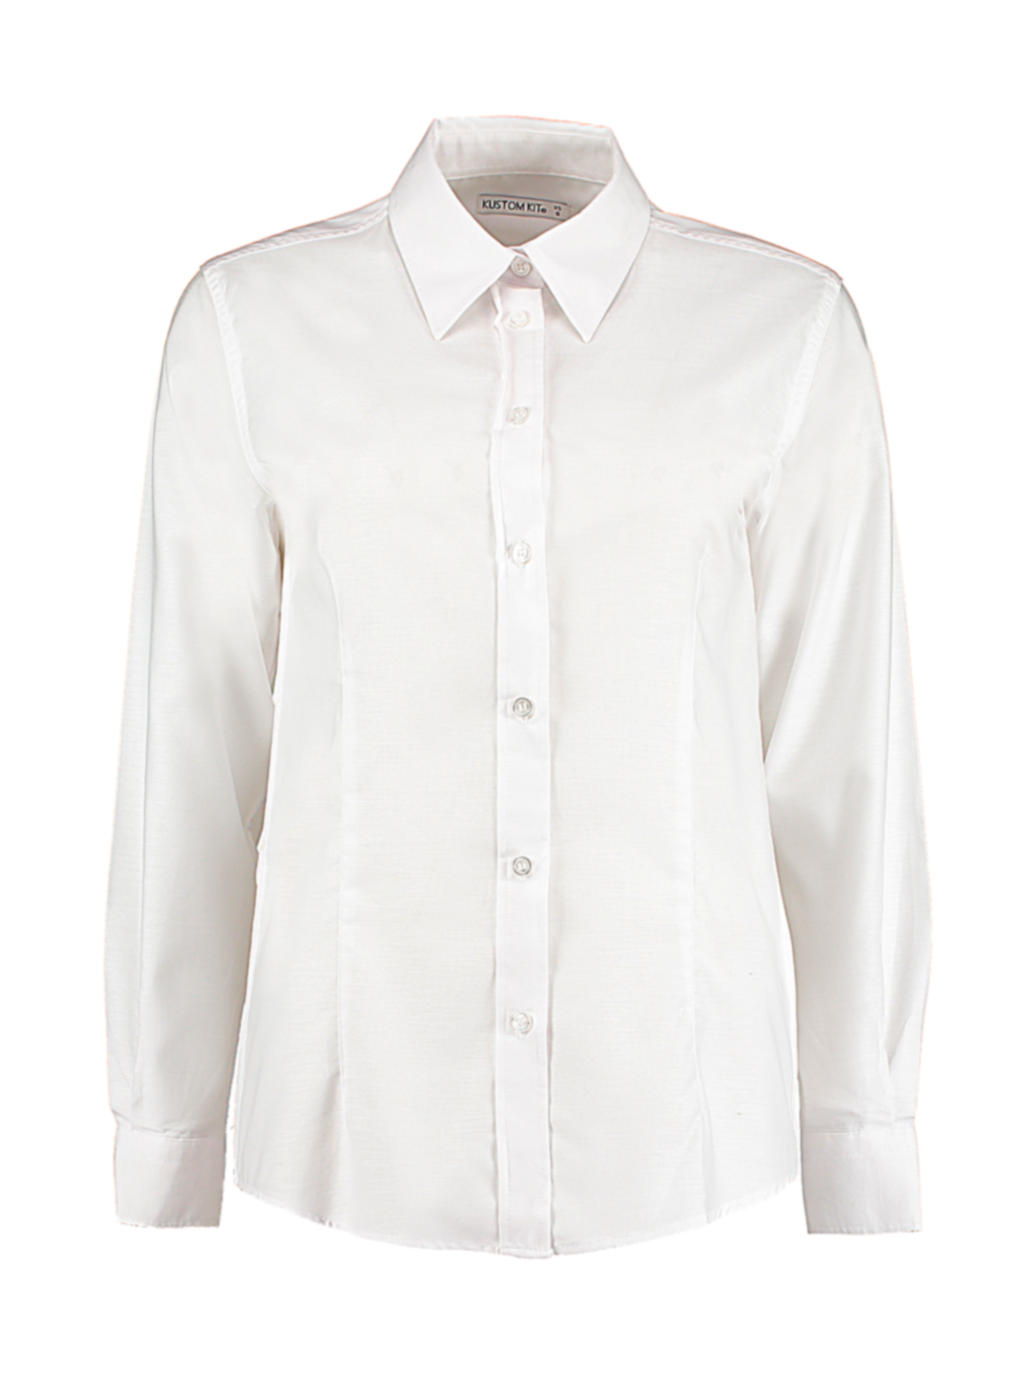  Womens Tailored Fit Workwear Oxford Shirt in Farbe White